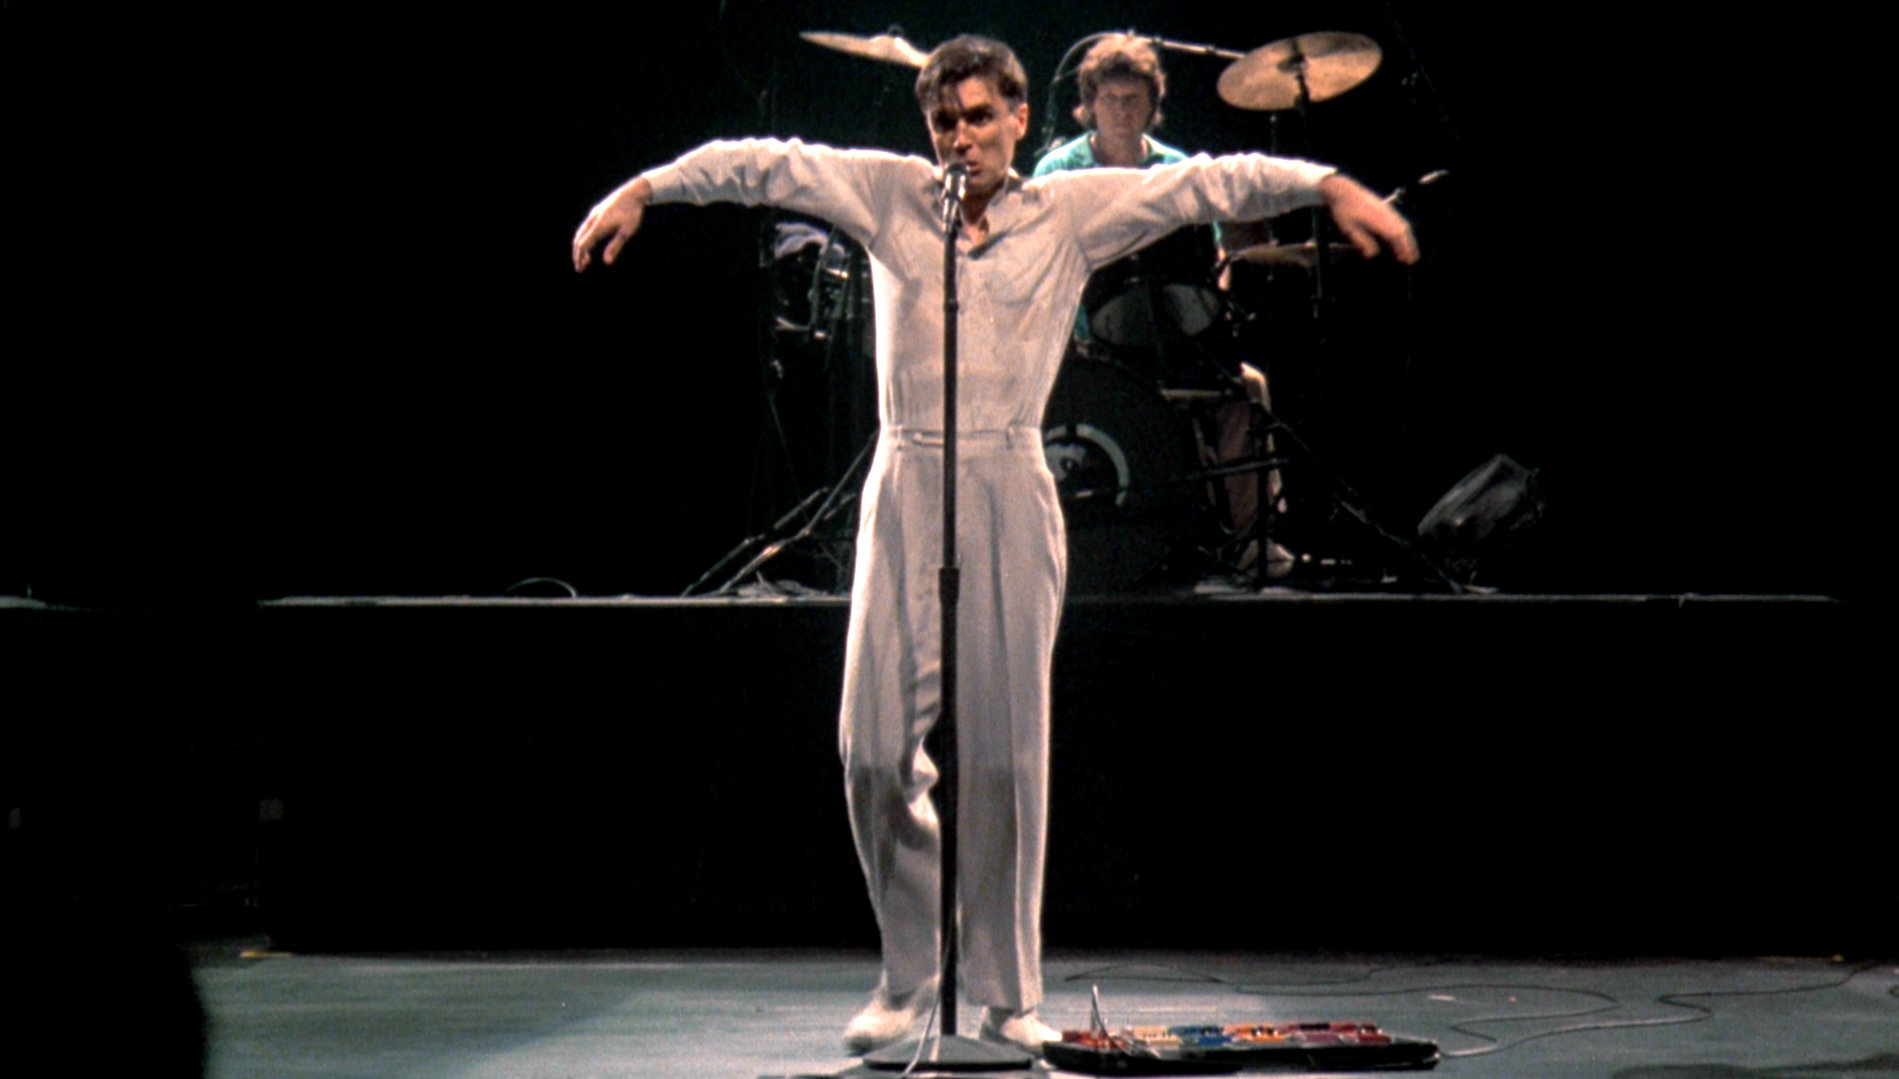 A24 to Restore Jonathan Demme’s Stop Making Sense in 4K for Worldwide Theatrical Release